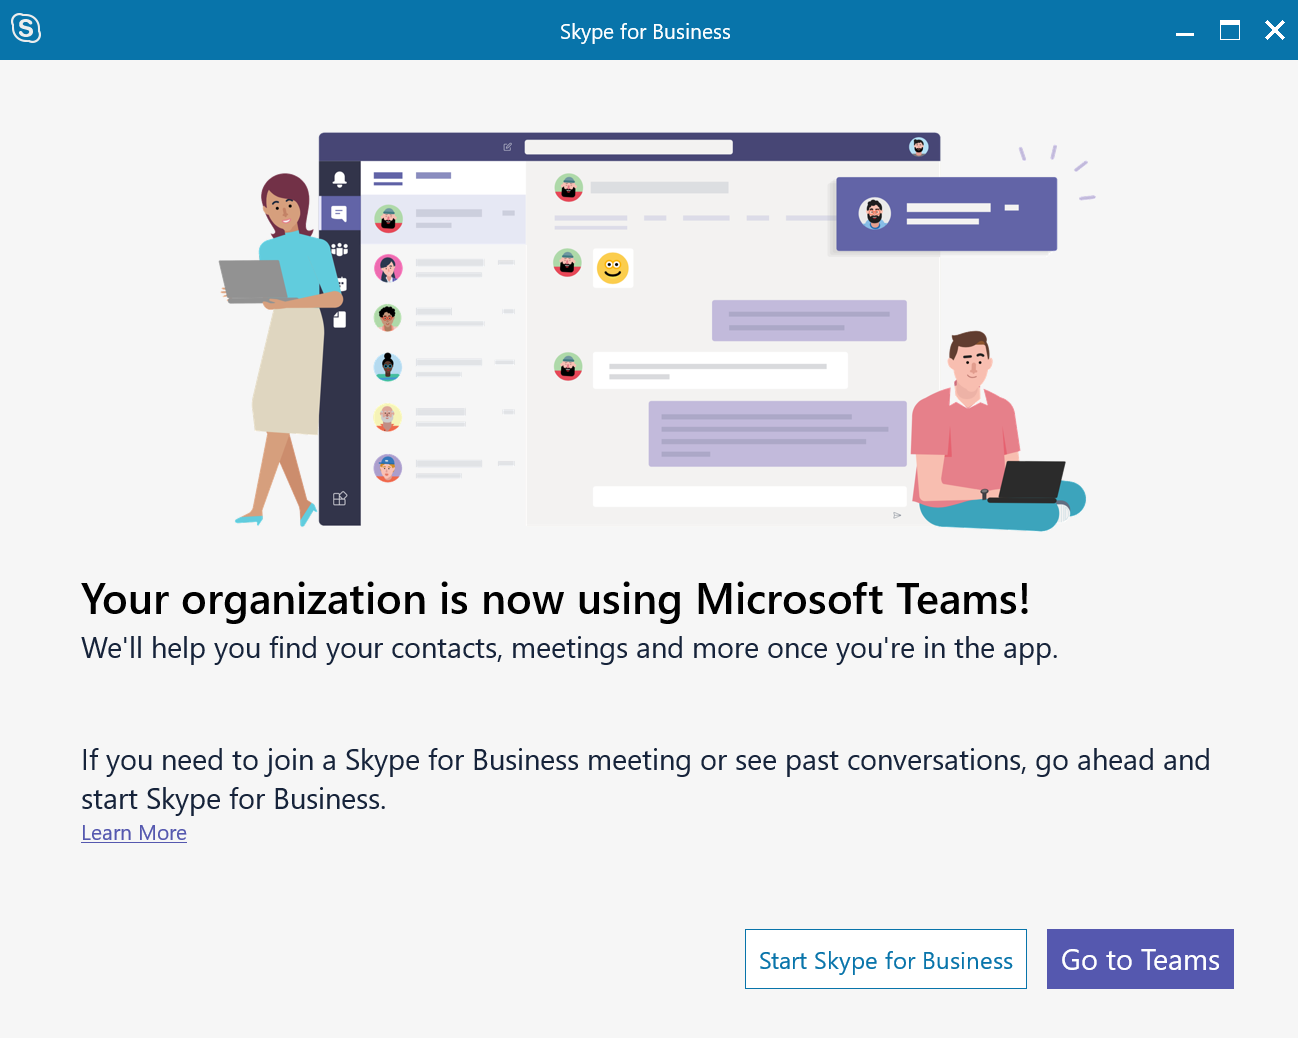 Enabling Skype for Business in a new Teams-Only Office